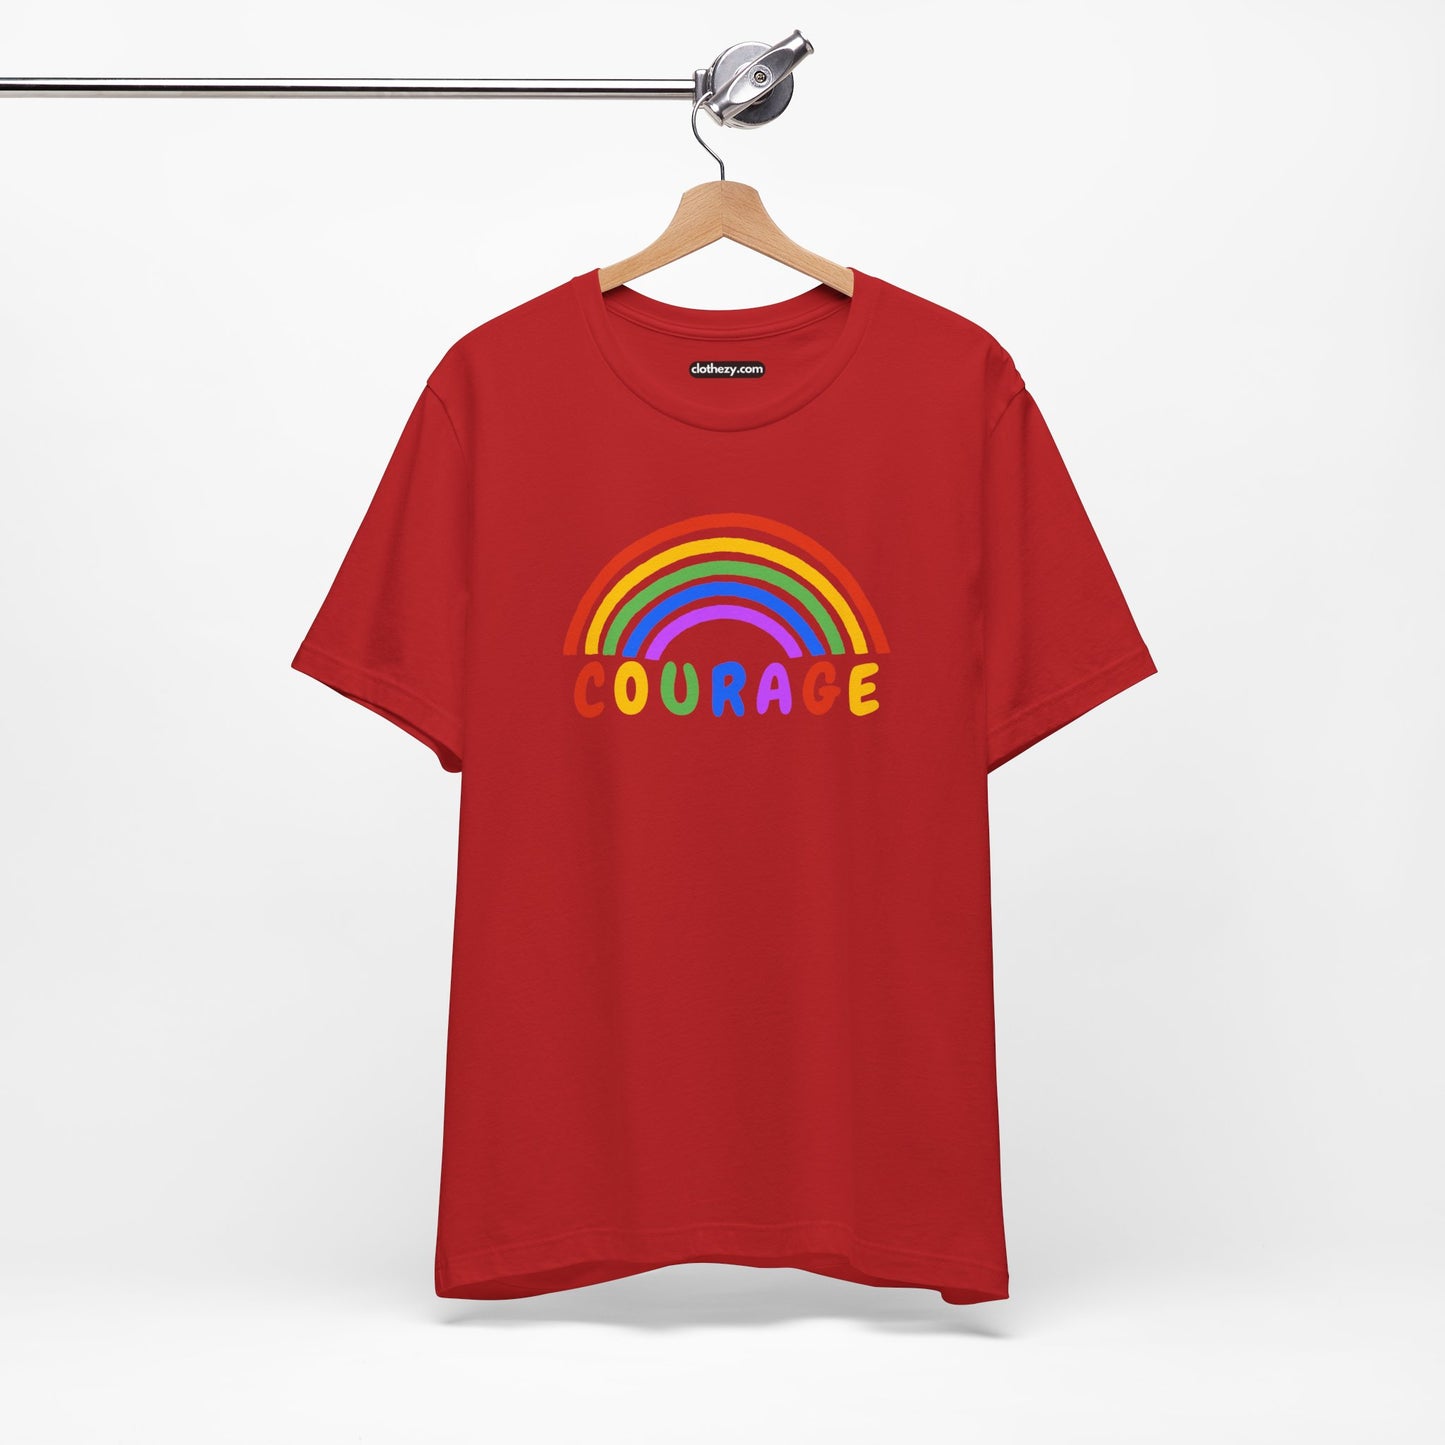 Rainbow Courage - Soft Cotton Adult Unisex T-Shirt, Gift for friends and family, Gift for friends and family by clothezy.com - Buy Now